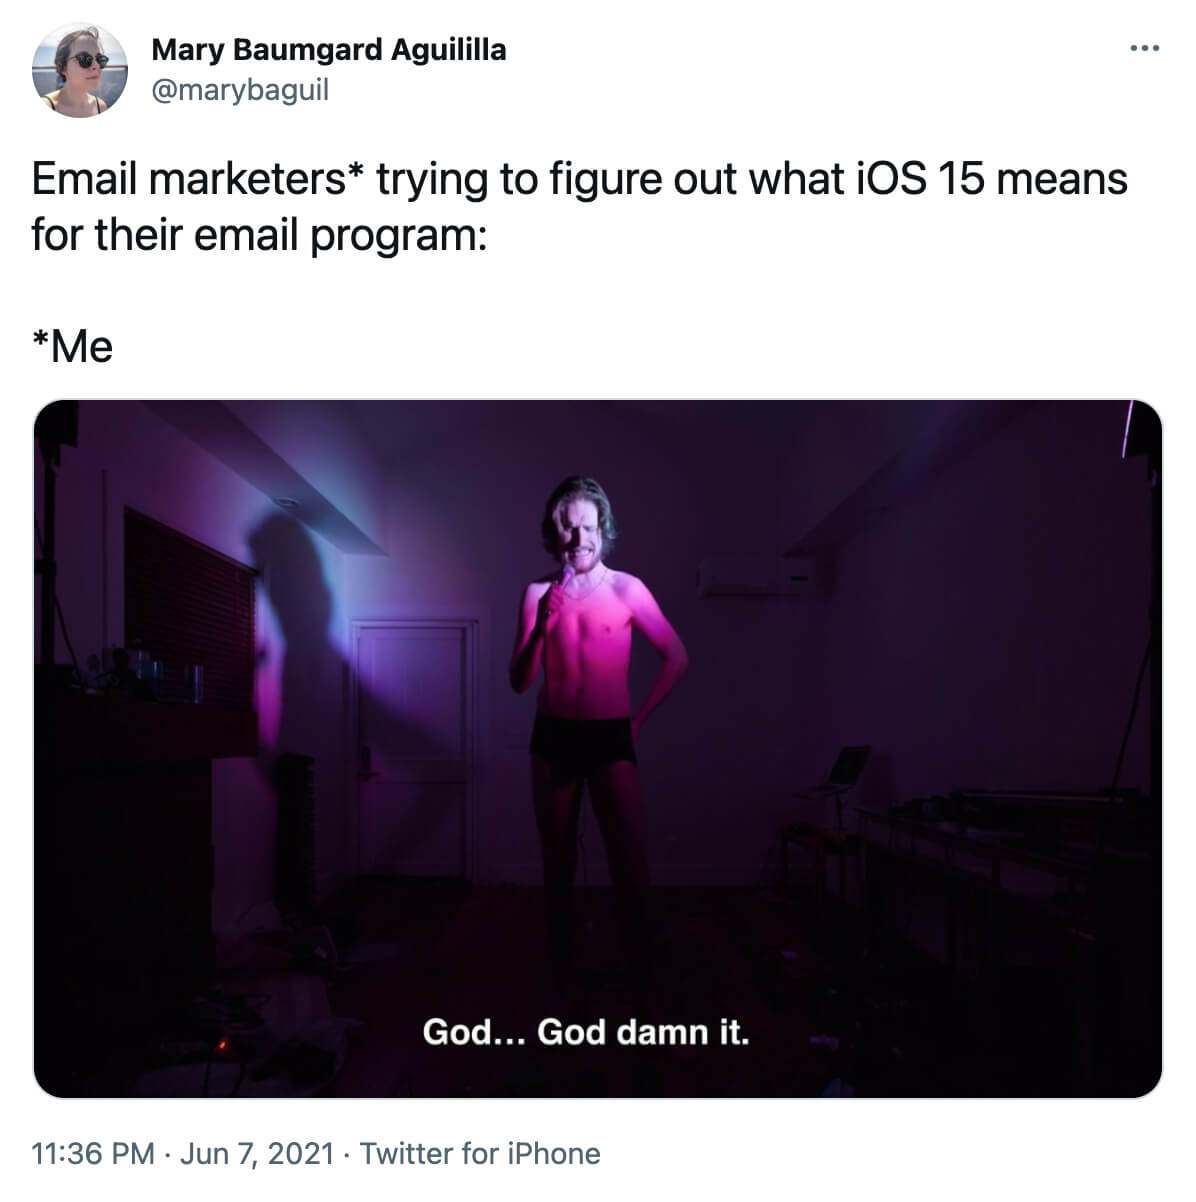 @marybaguil on twitter: Emailer marketers* trying to figure out what iOS 15 means for their email program: Bo Burnham with a blue and pink spotlight on him saying 'God...God damn it.'  *Me